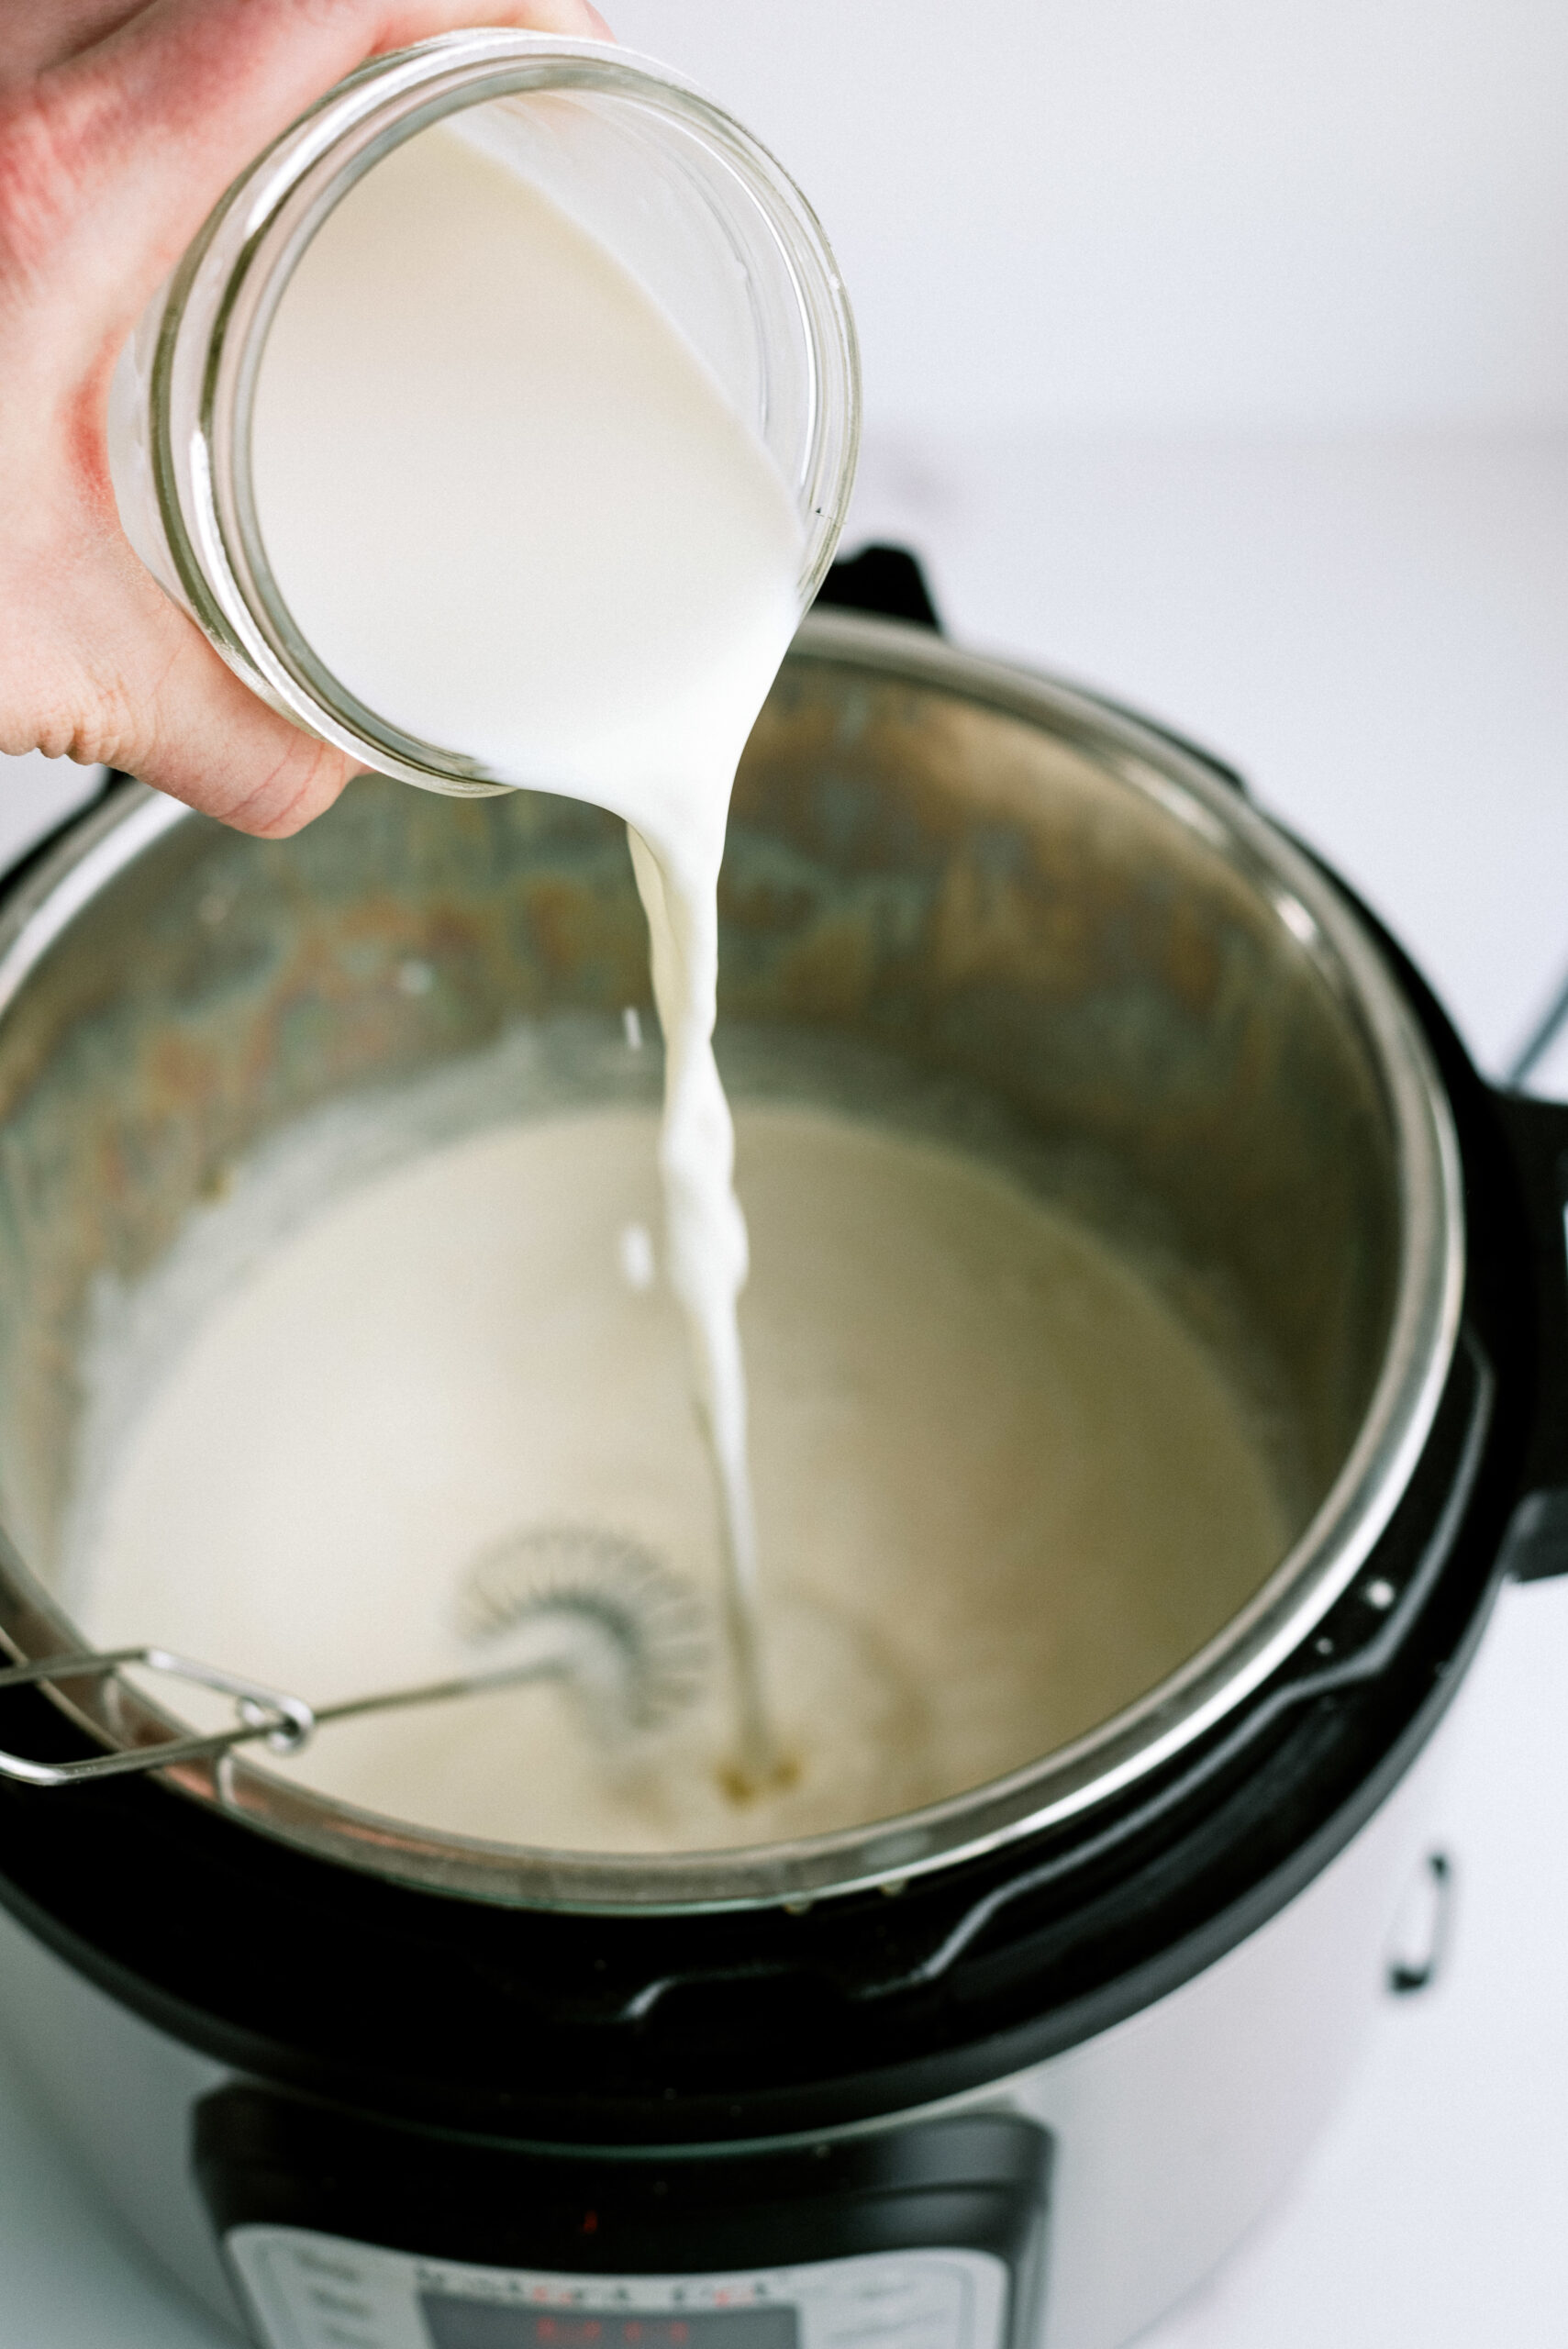 cream added to the instant pot